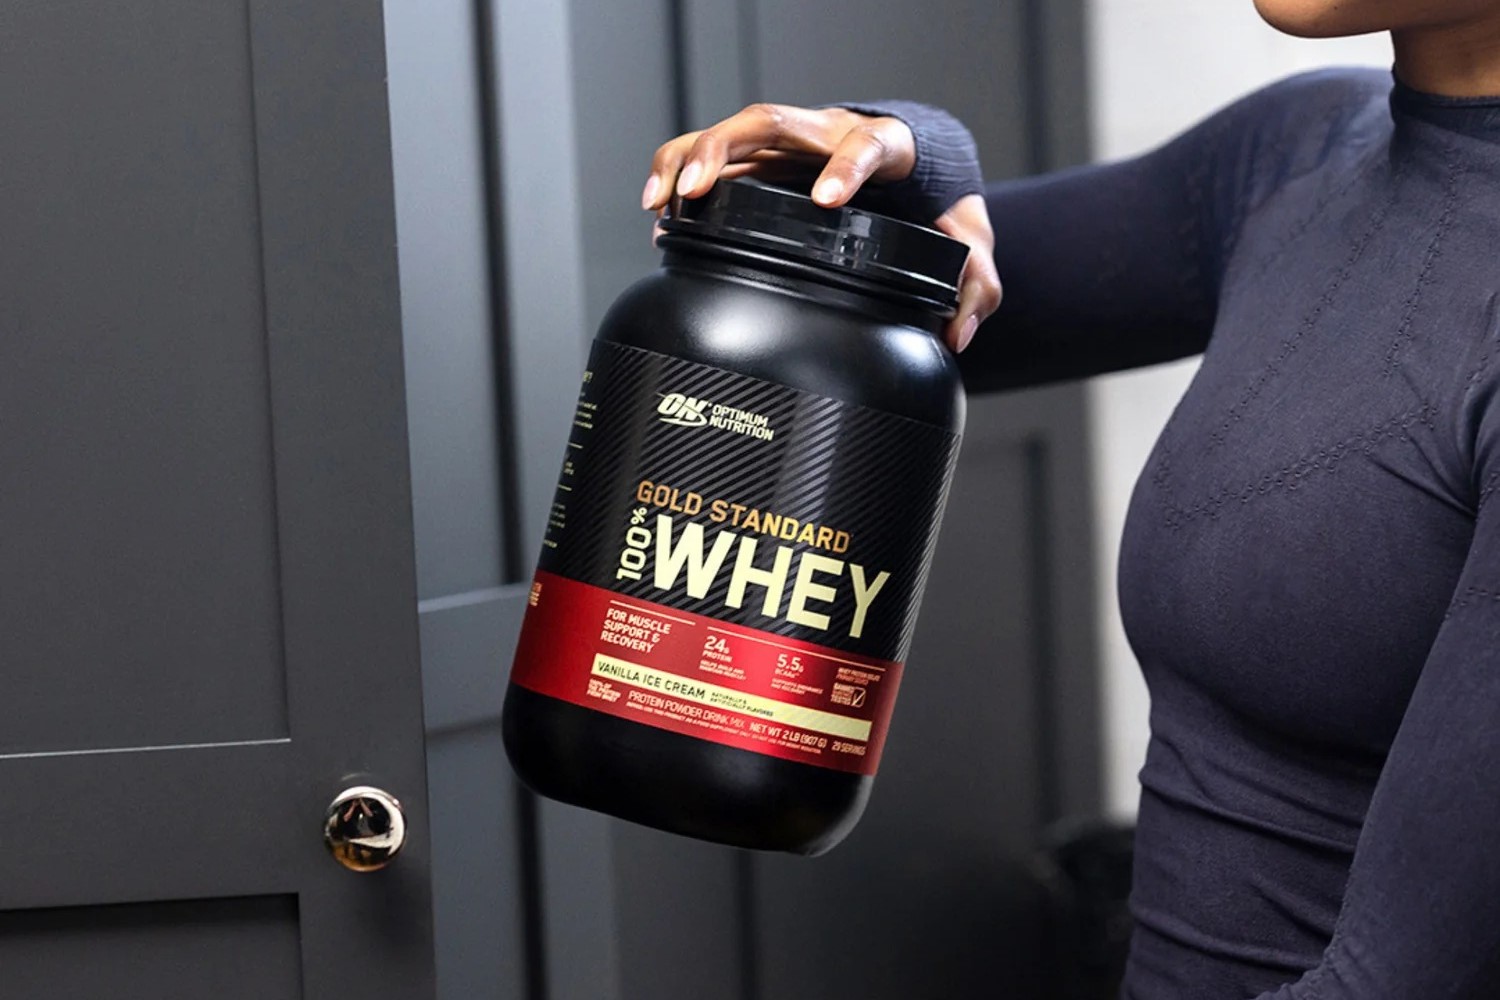 19-gold-standard-natural-whey-nutrition-facts